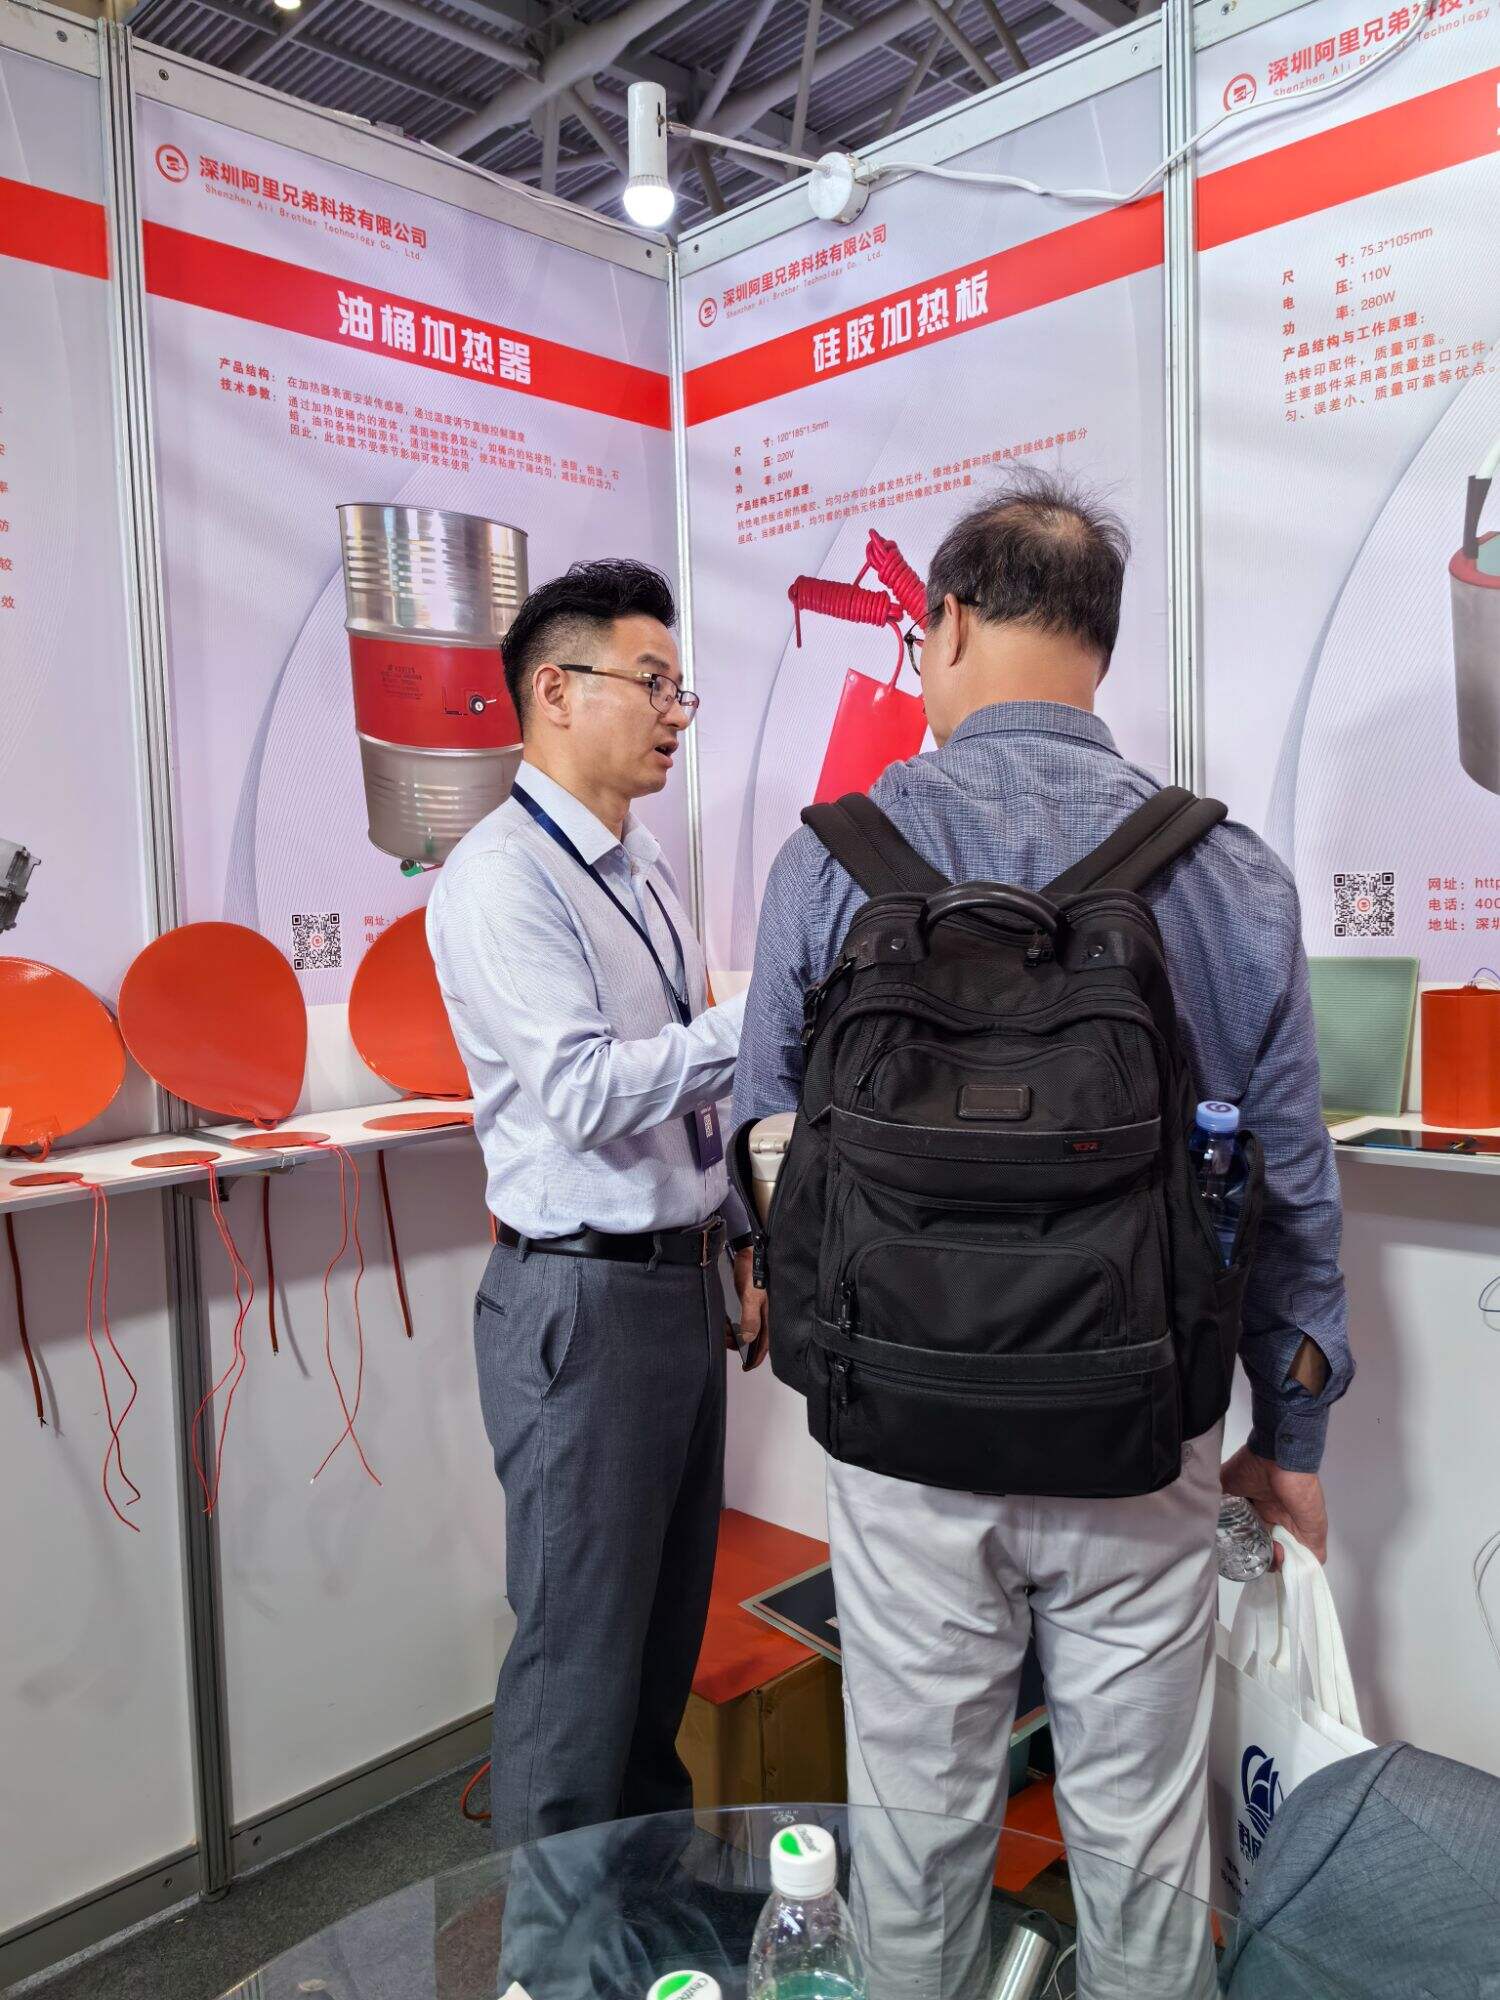 April battery show successfully concluded